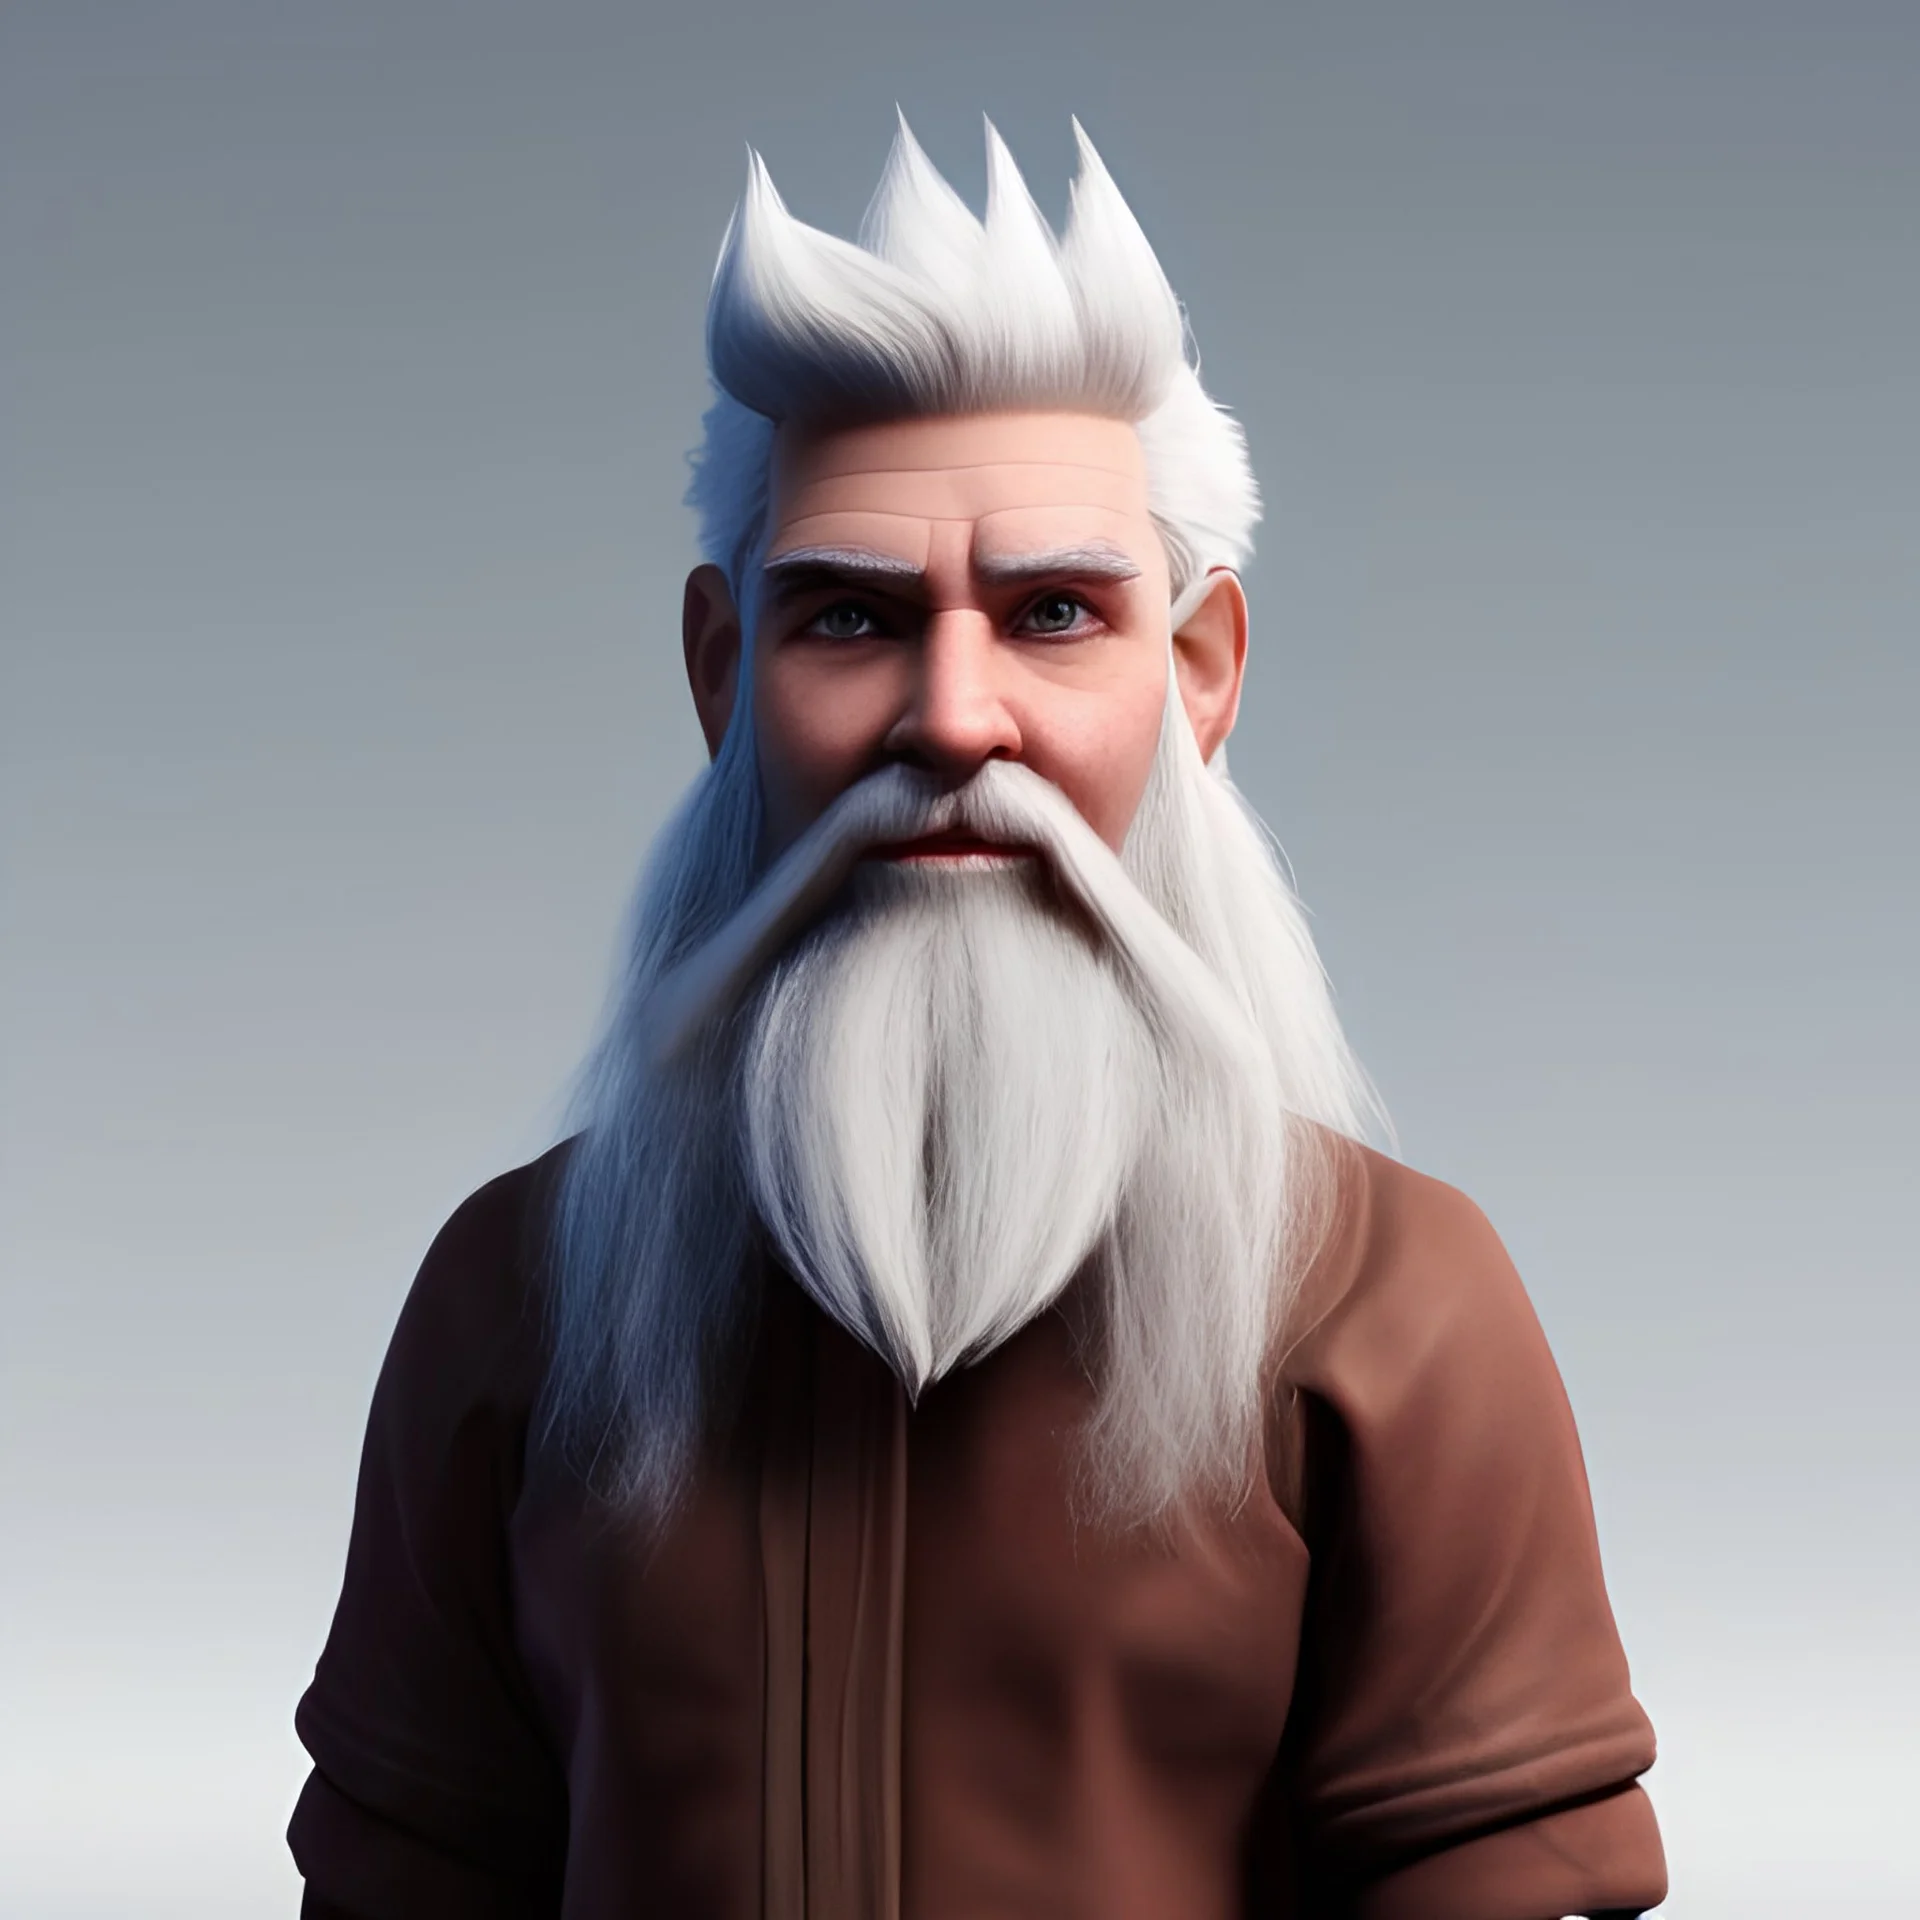 dungeons and dragons dwarf with white hair and beard wearing normal clothes